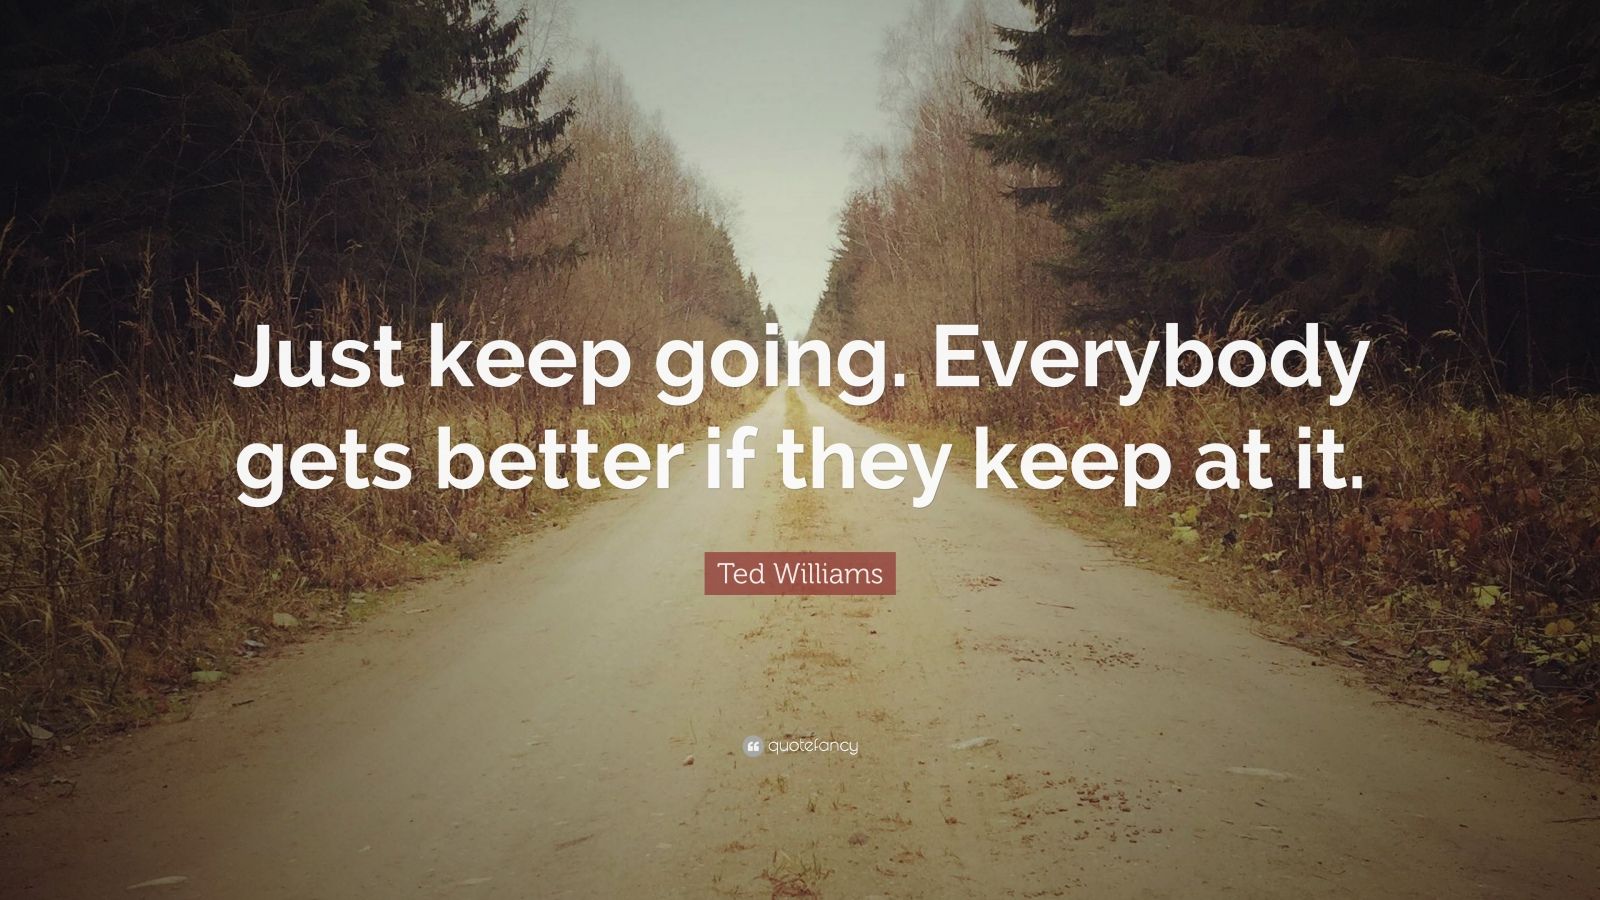 Ted Williams Quote “Just keep going. Everybody gets